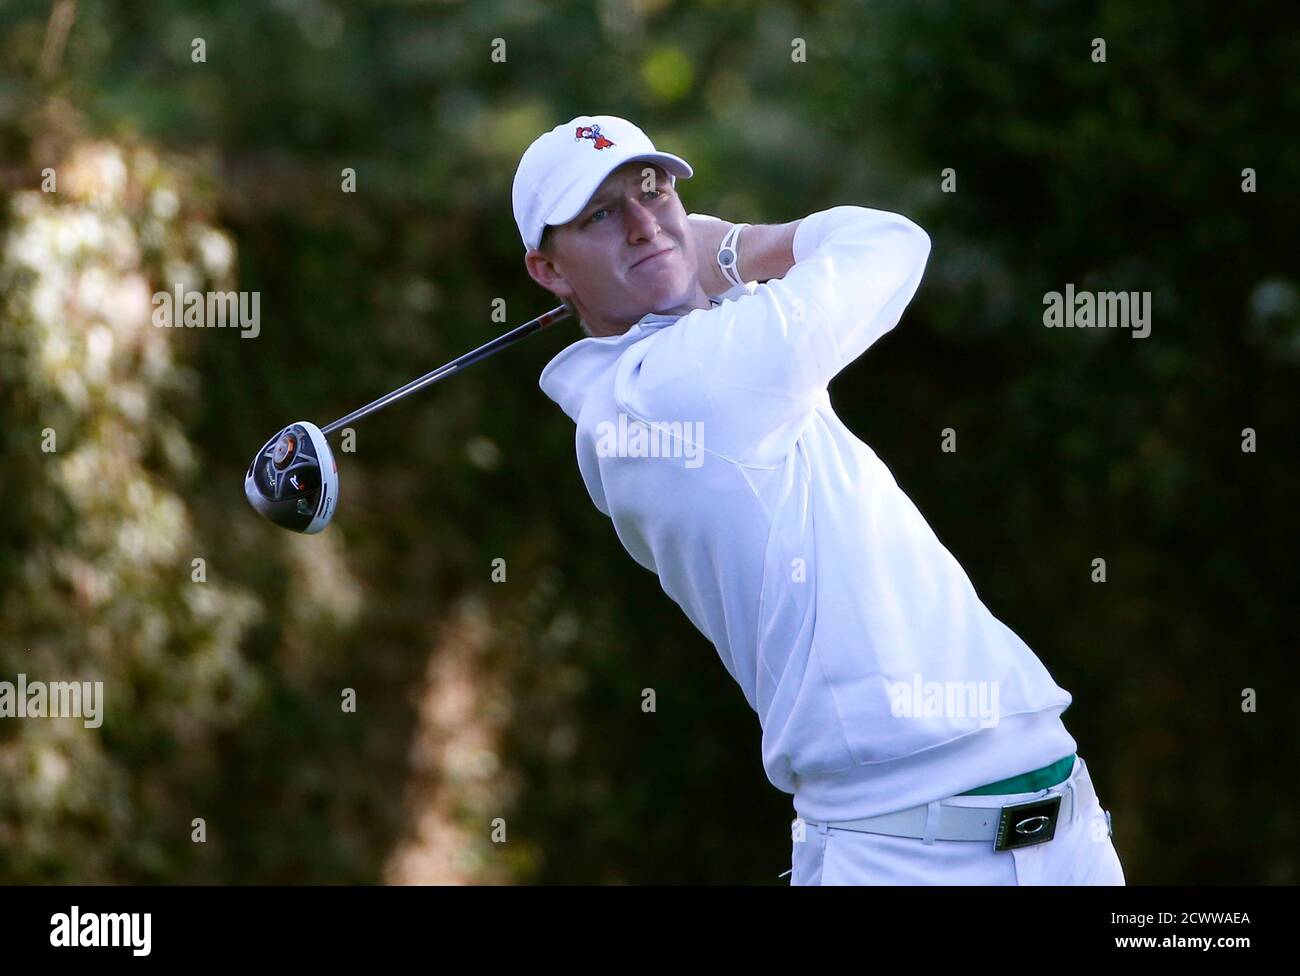 U.S. amateur golfer Hordan Niebrugge hits his tee shot on the second hole during the first round of the 2014 Masters golf tournament at the Augusta National Golf Club in Augusta, Georgia April 10, 2014. REUTERS/Jim Young (UNITED STATES  - Tags: SPORT GOLF) Stock Photo